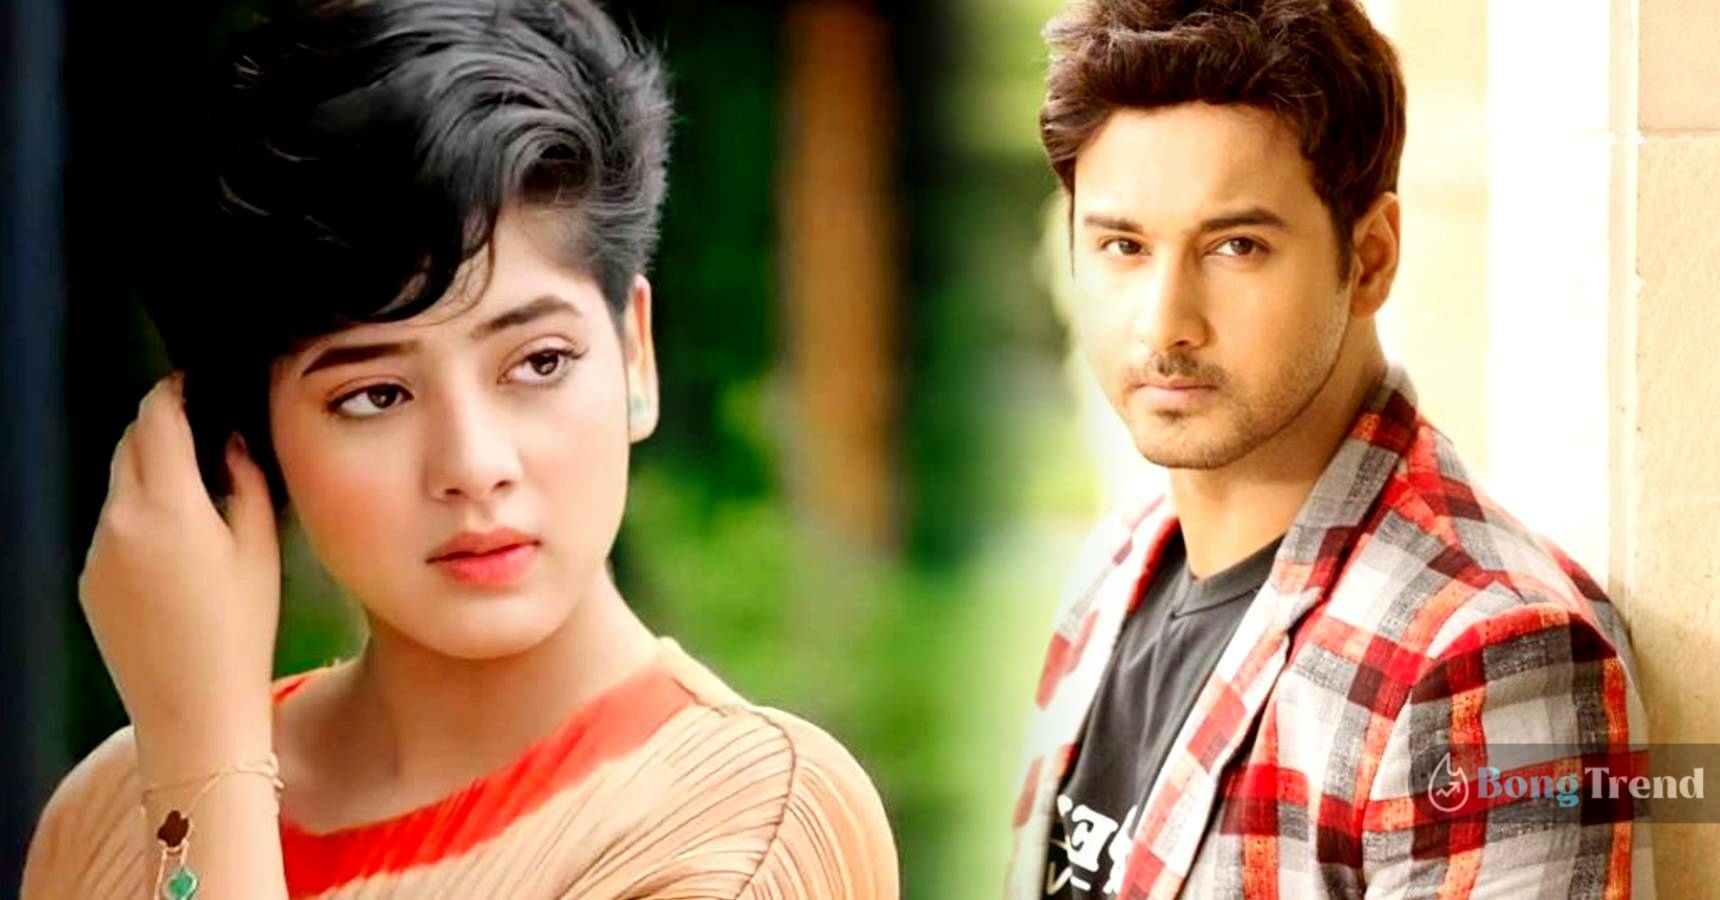 Yash Dasgupta and Ditipriya Roy to work together in a movie